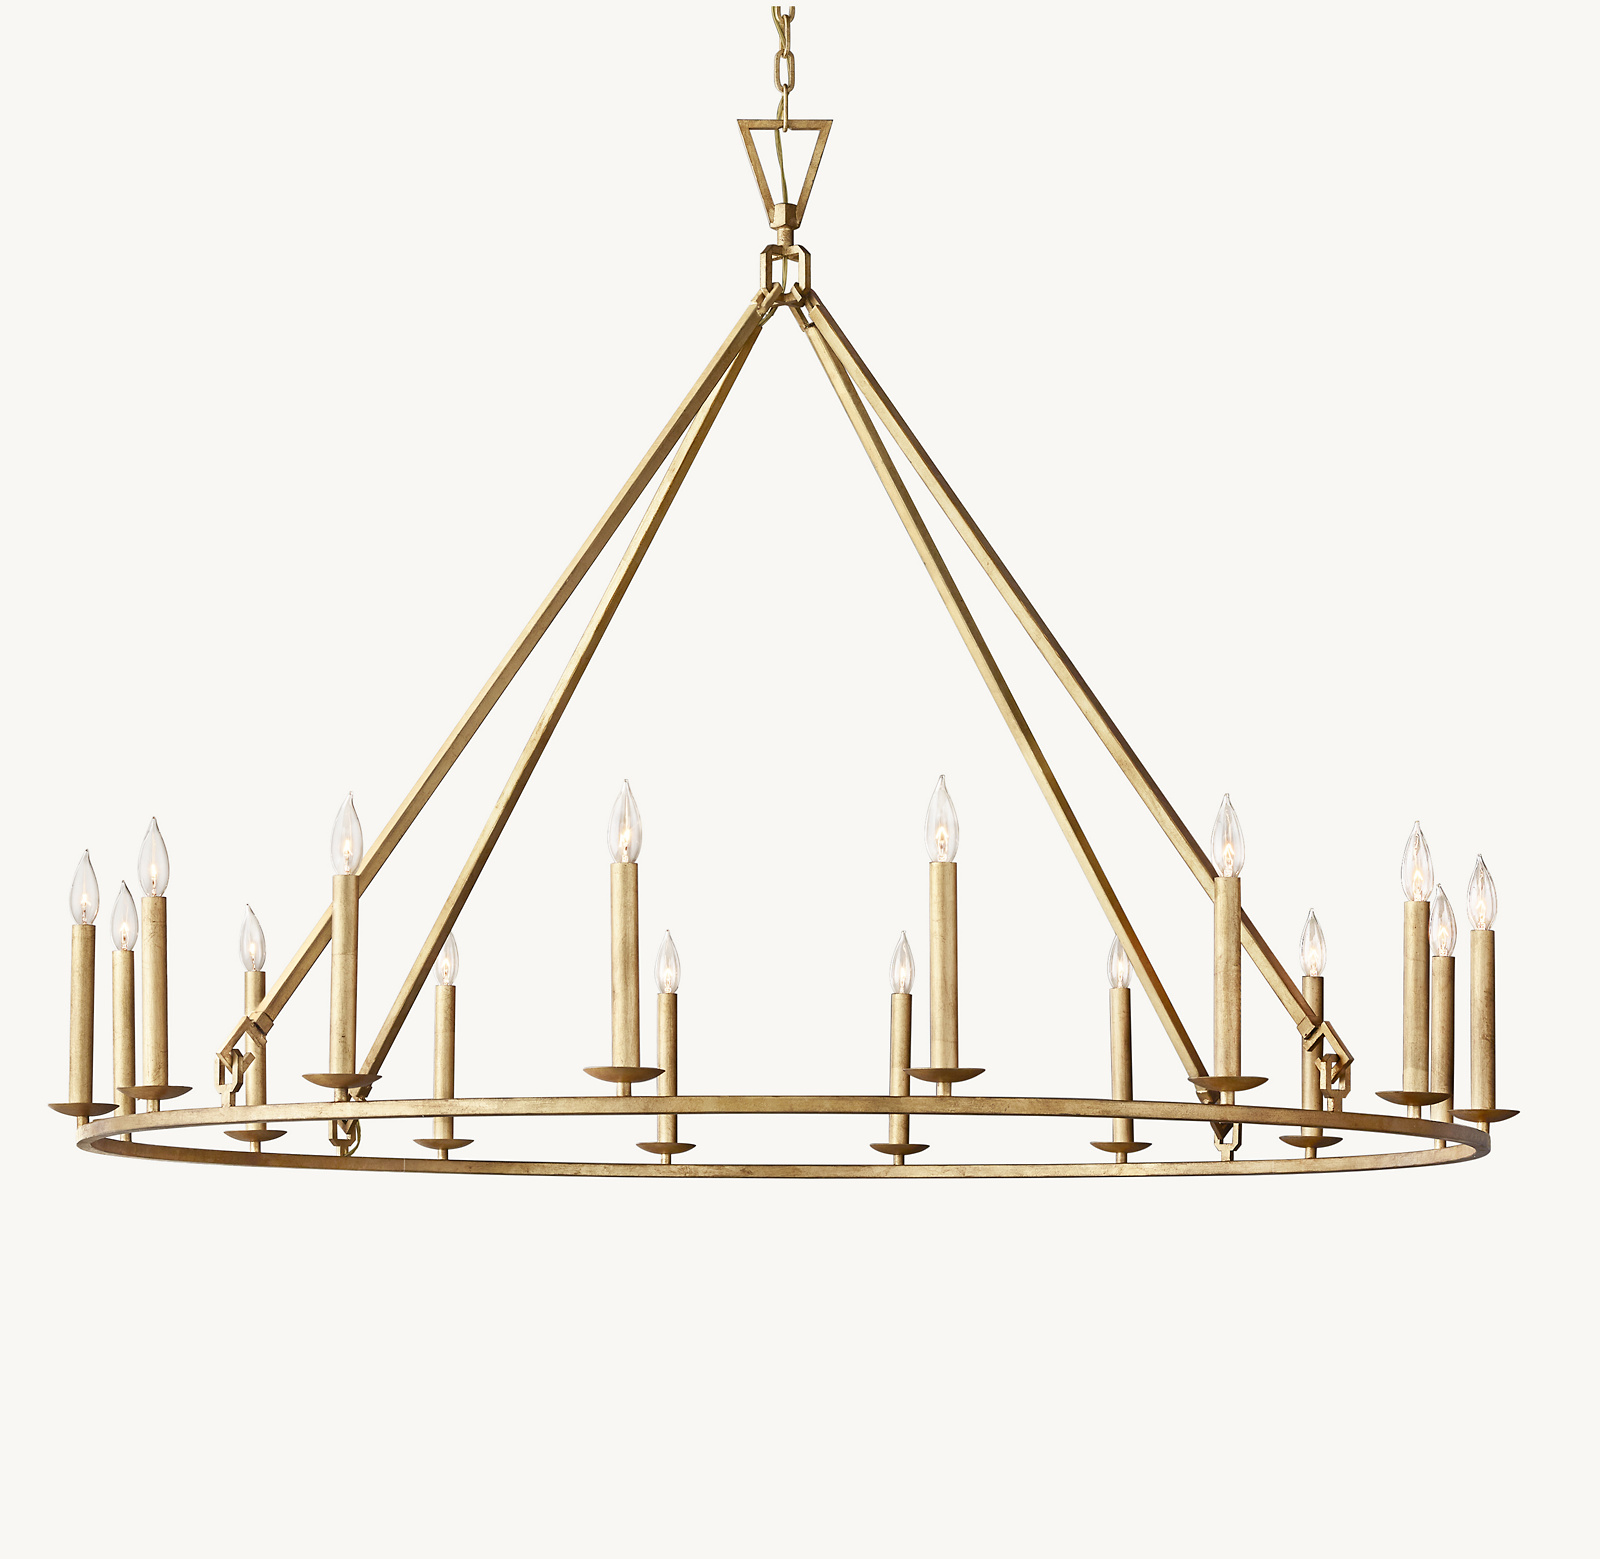 Shown in Gilded Iron with metal candle sleeves (sold separately) in matching finish.